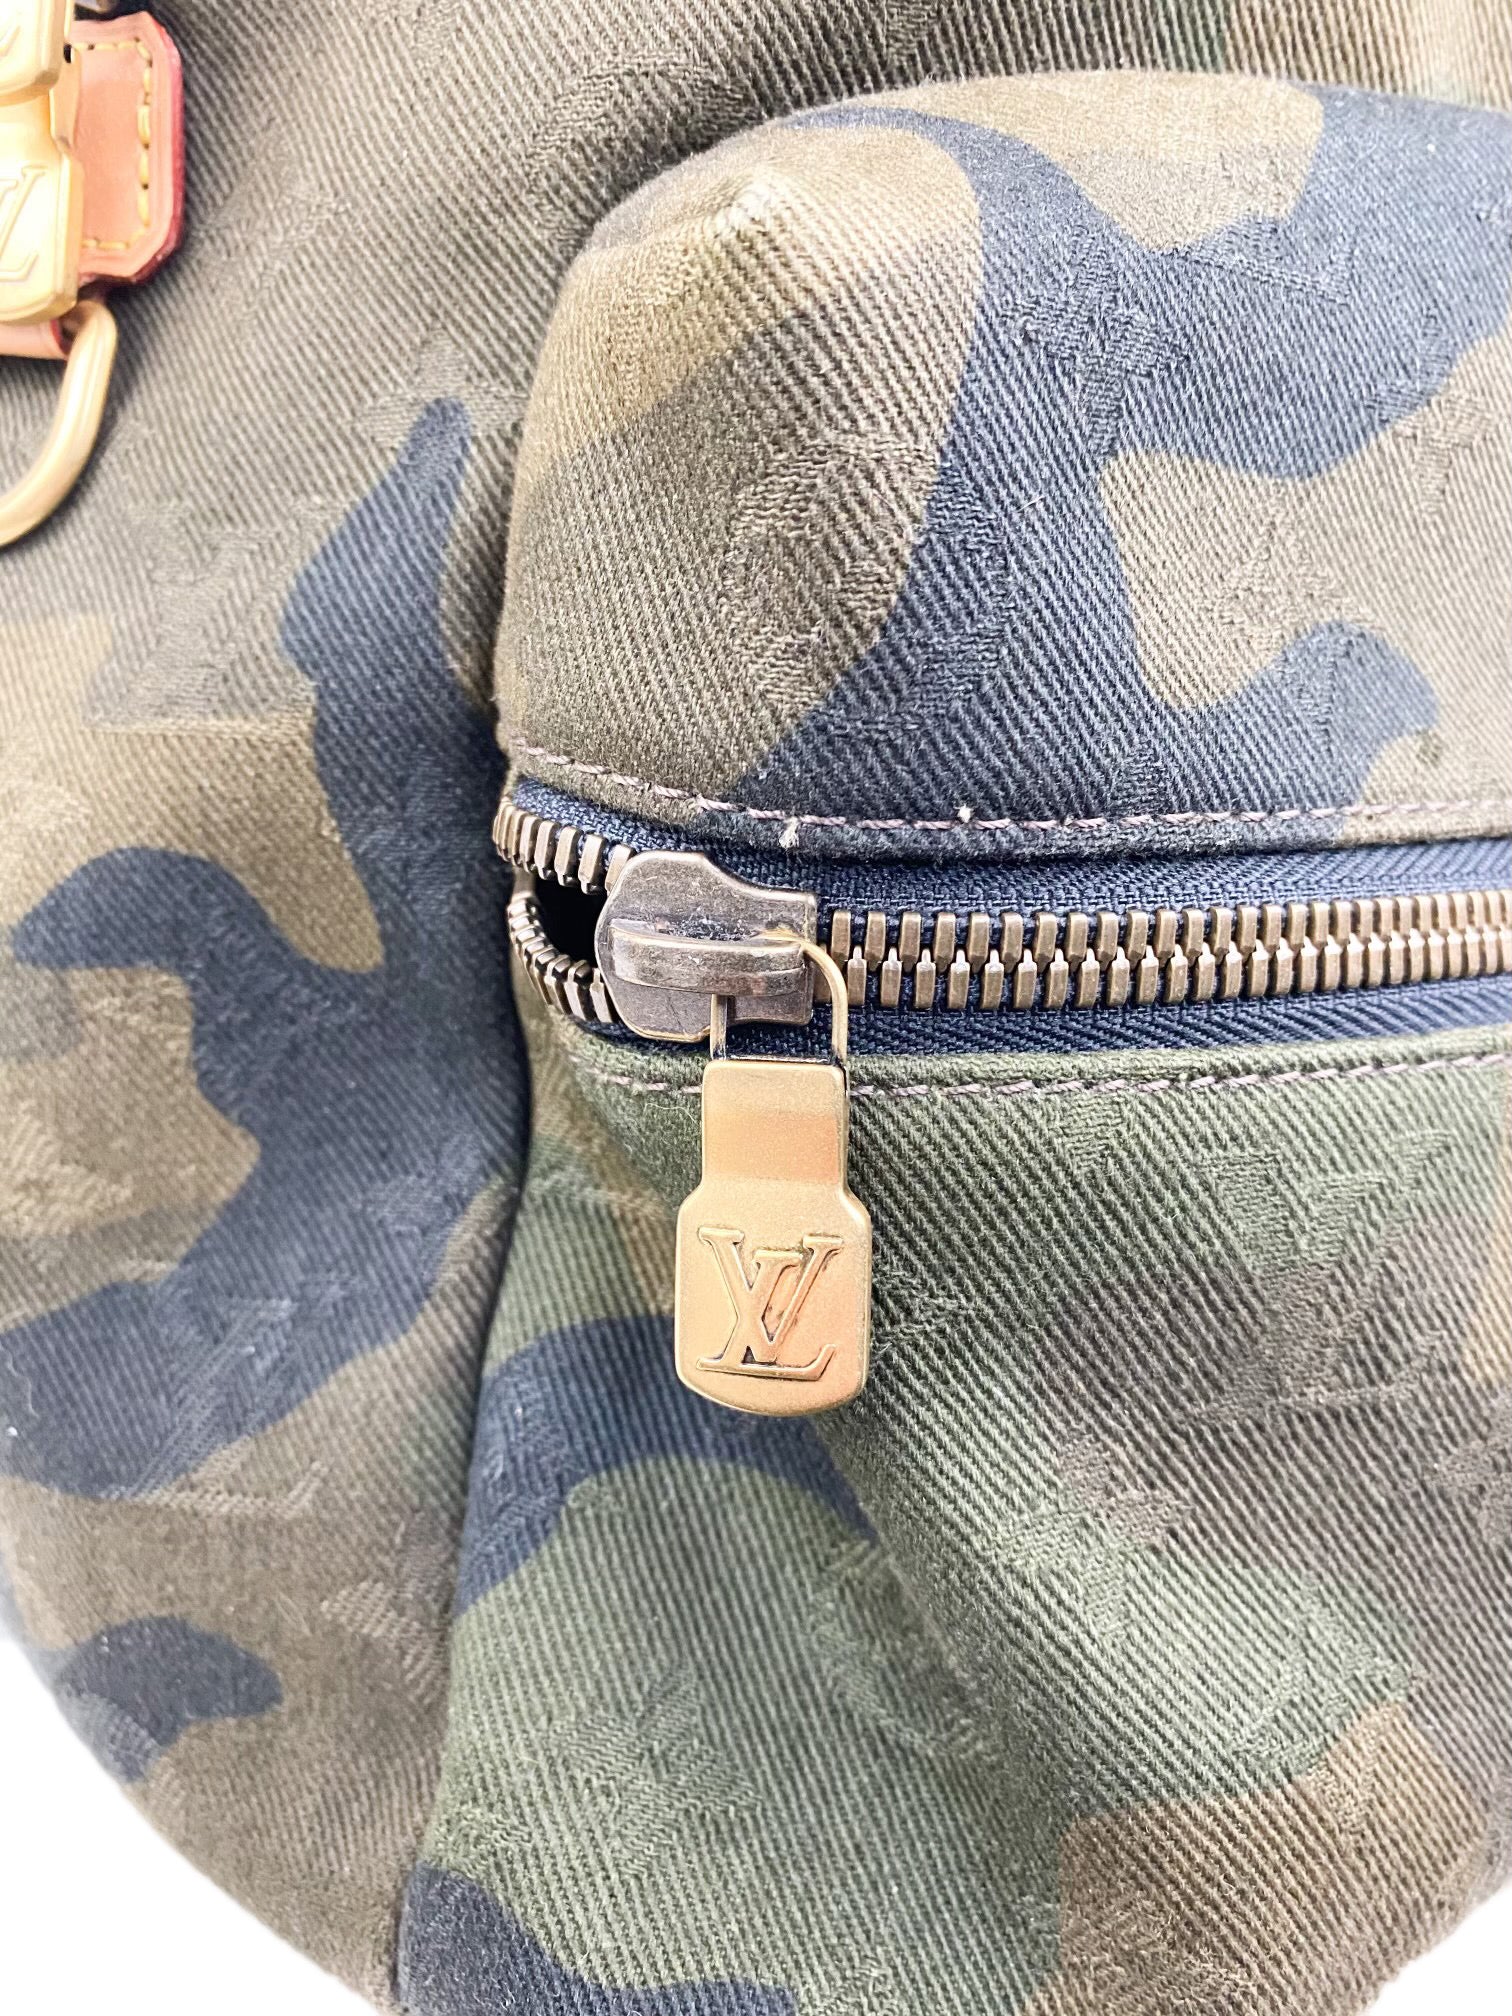 Louis Vuitton Supreme Apollo Backpack Nano Camo Available For Immediate  Sale At Sotheby's